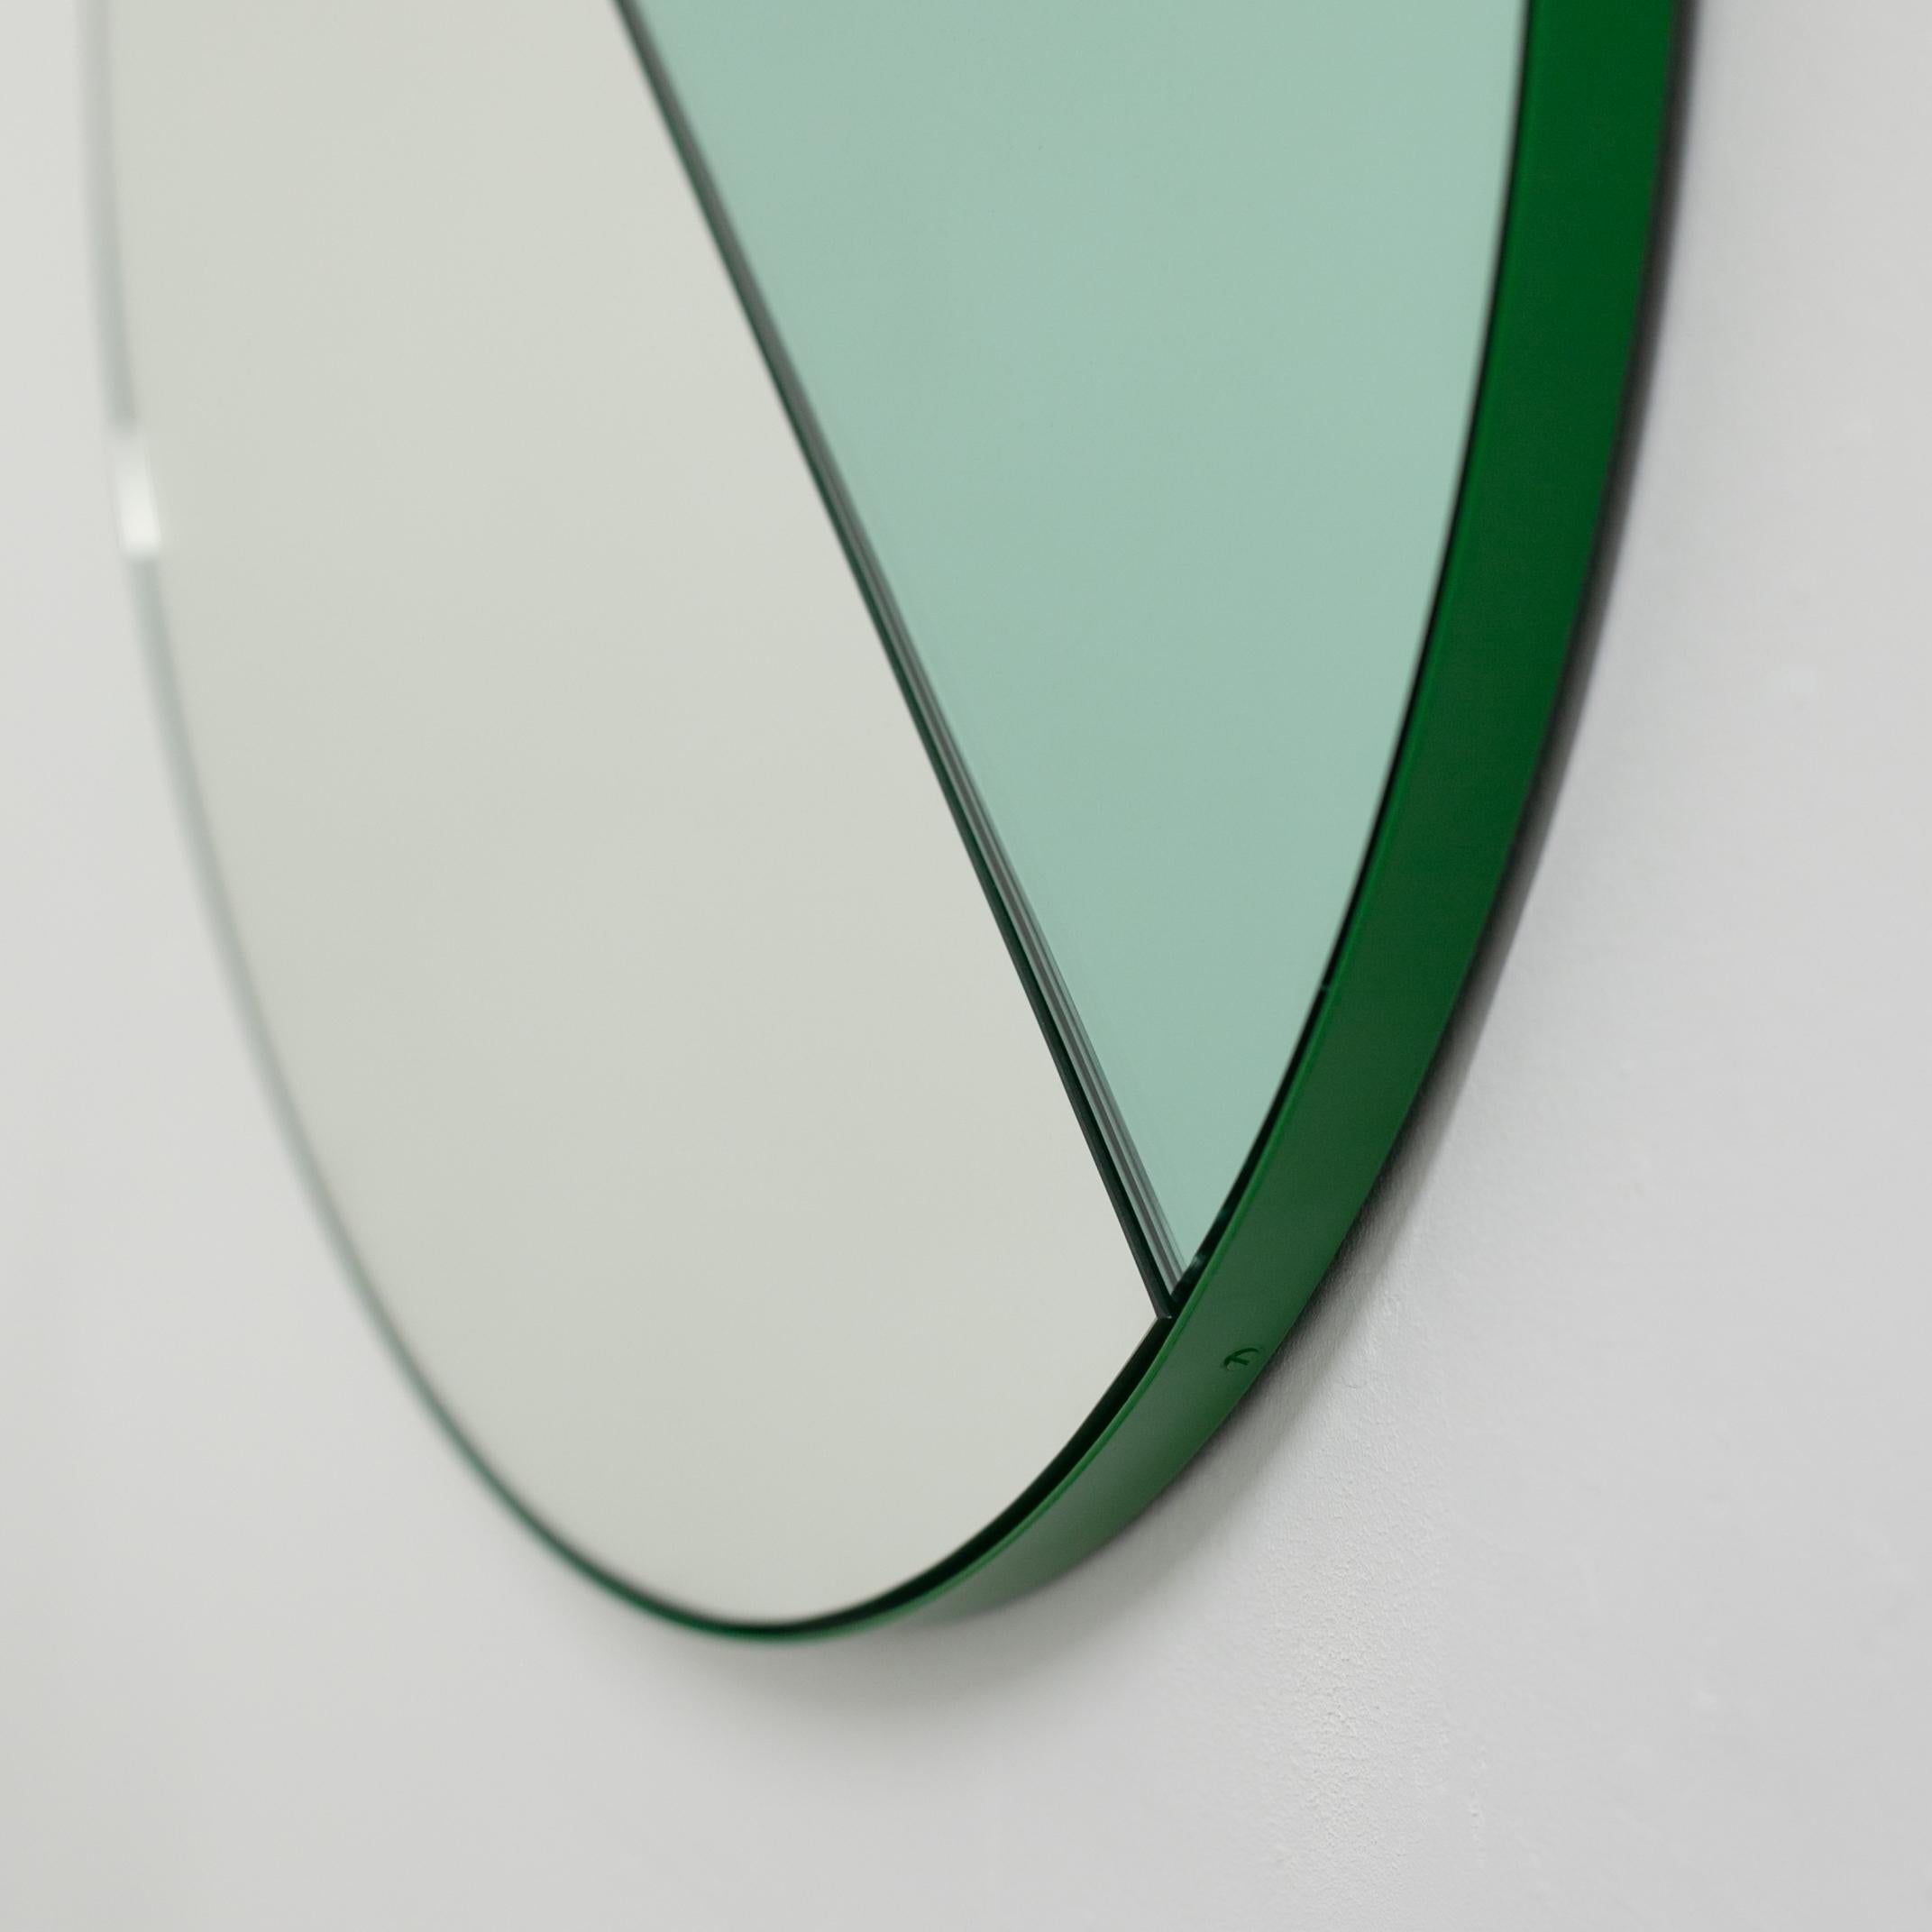 Orbis Dualis Mixed 'Green + Silver' Round Mirror with Green Frame, Large 6